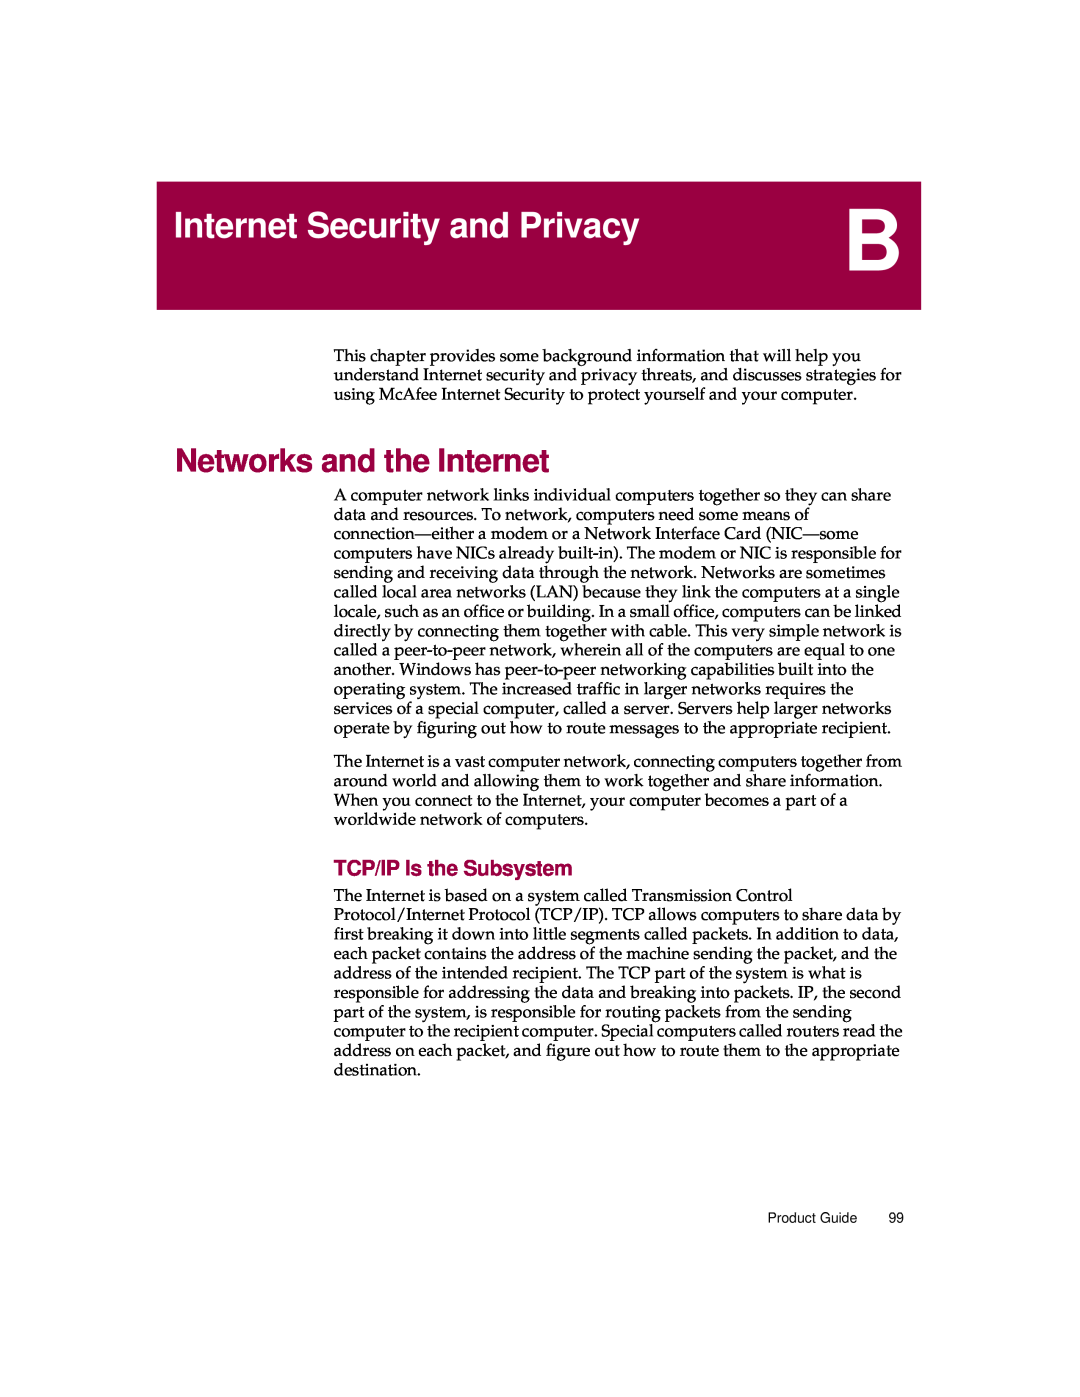 McAfee 5 manual Internet Security and Privacy, Networks and the Internet, TCP/IP Is the Subsystem 